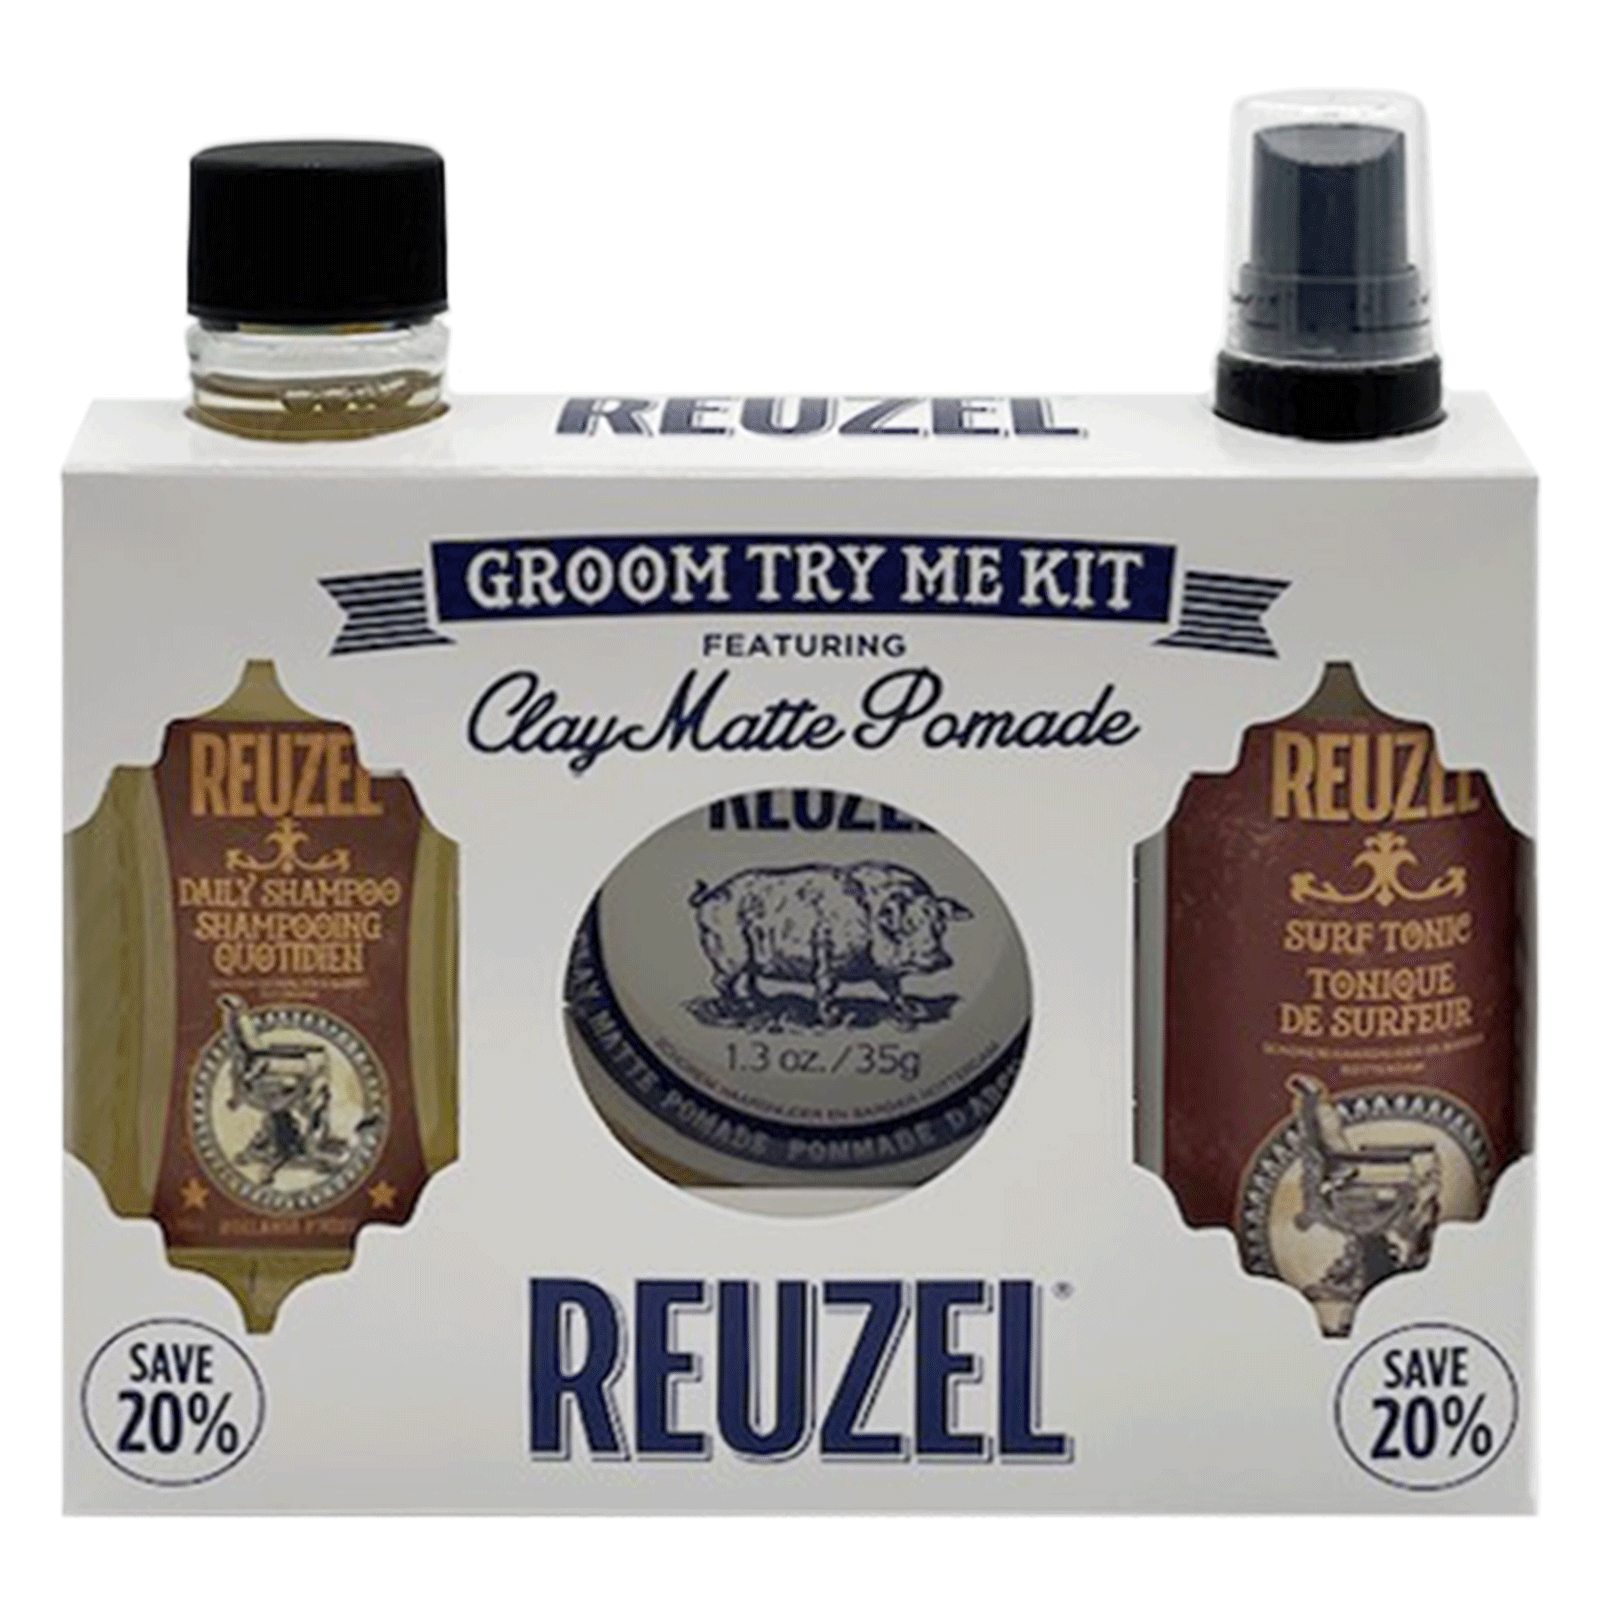 Groom Try Me Kit Featuring Clay Matte Pomade